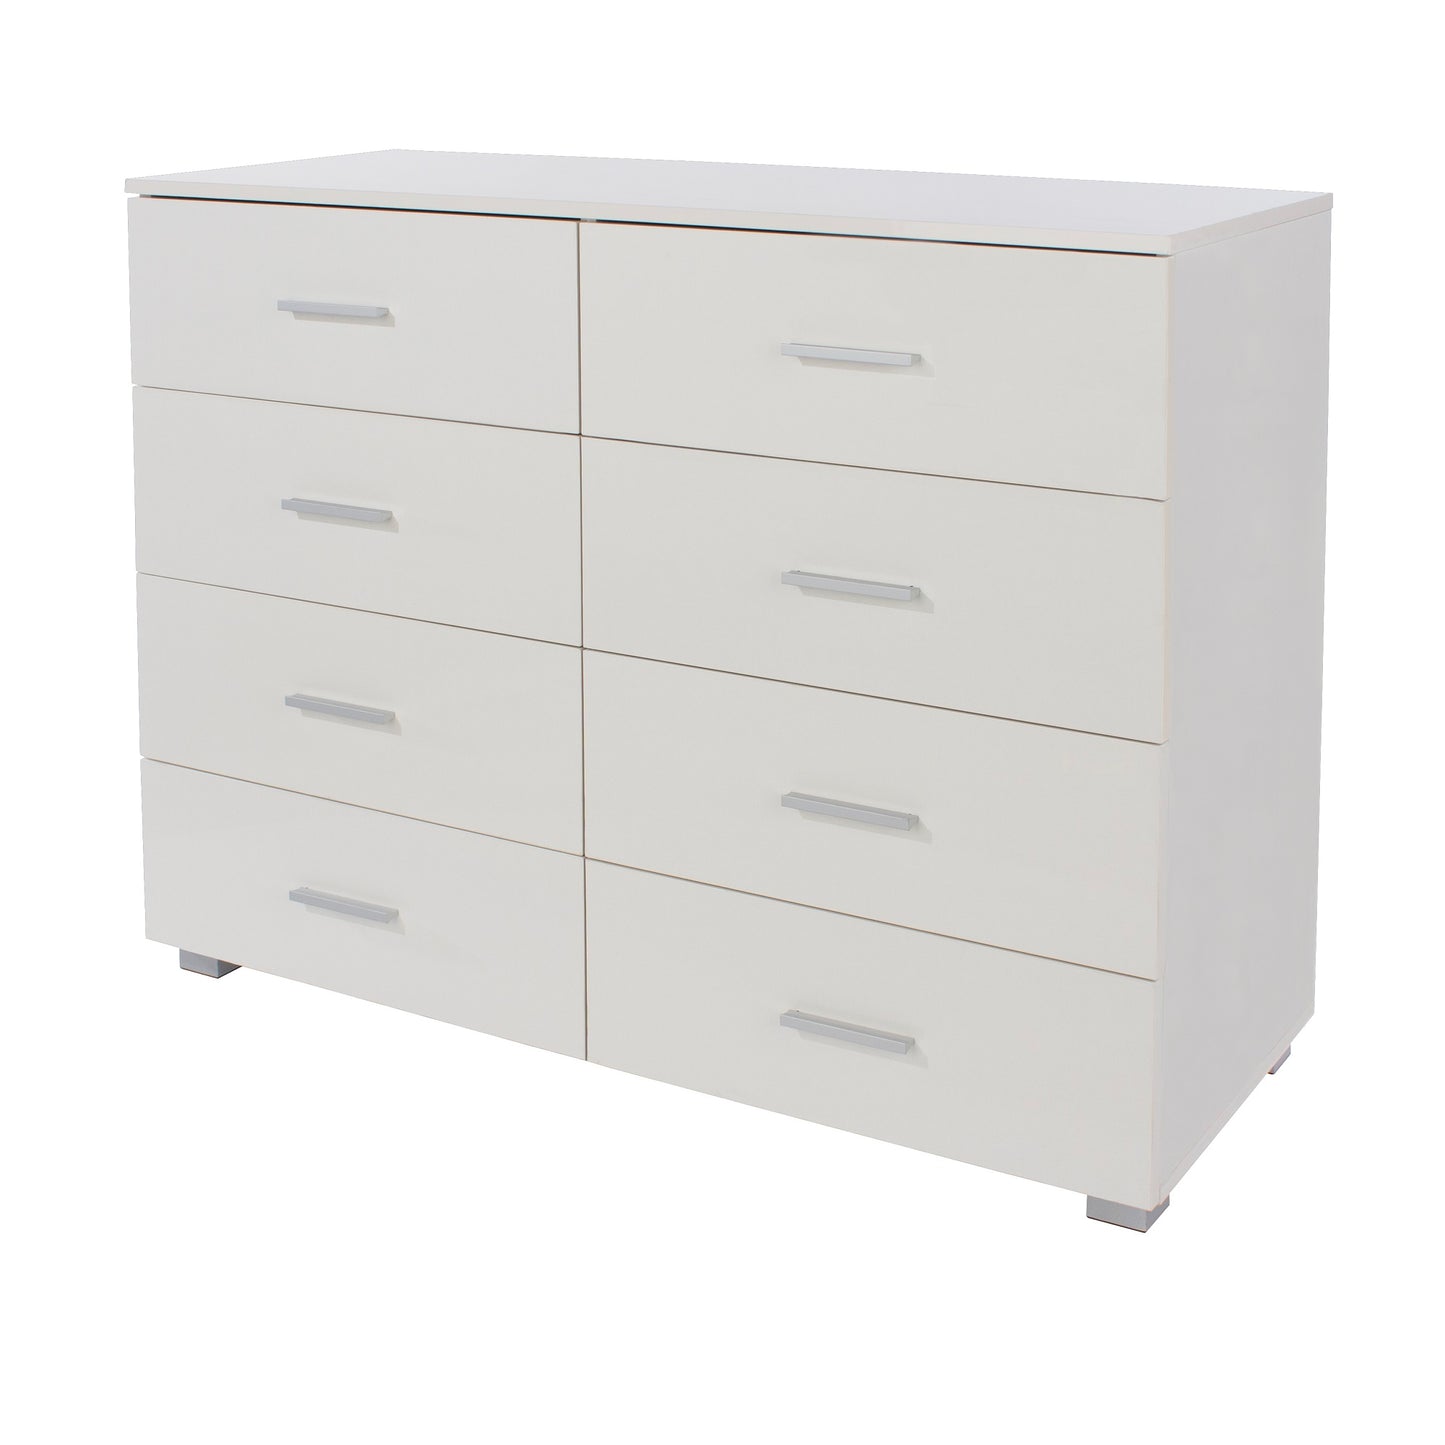 8 Drawer Wide Chest